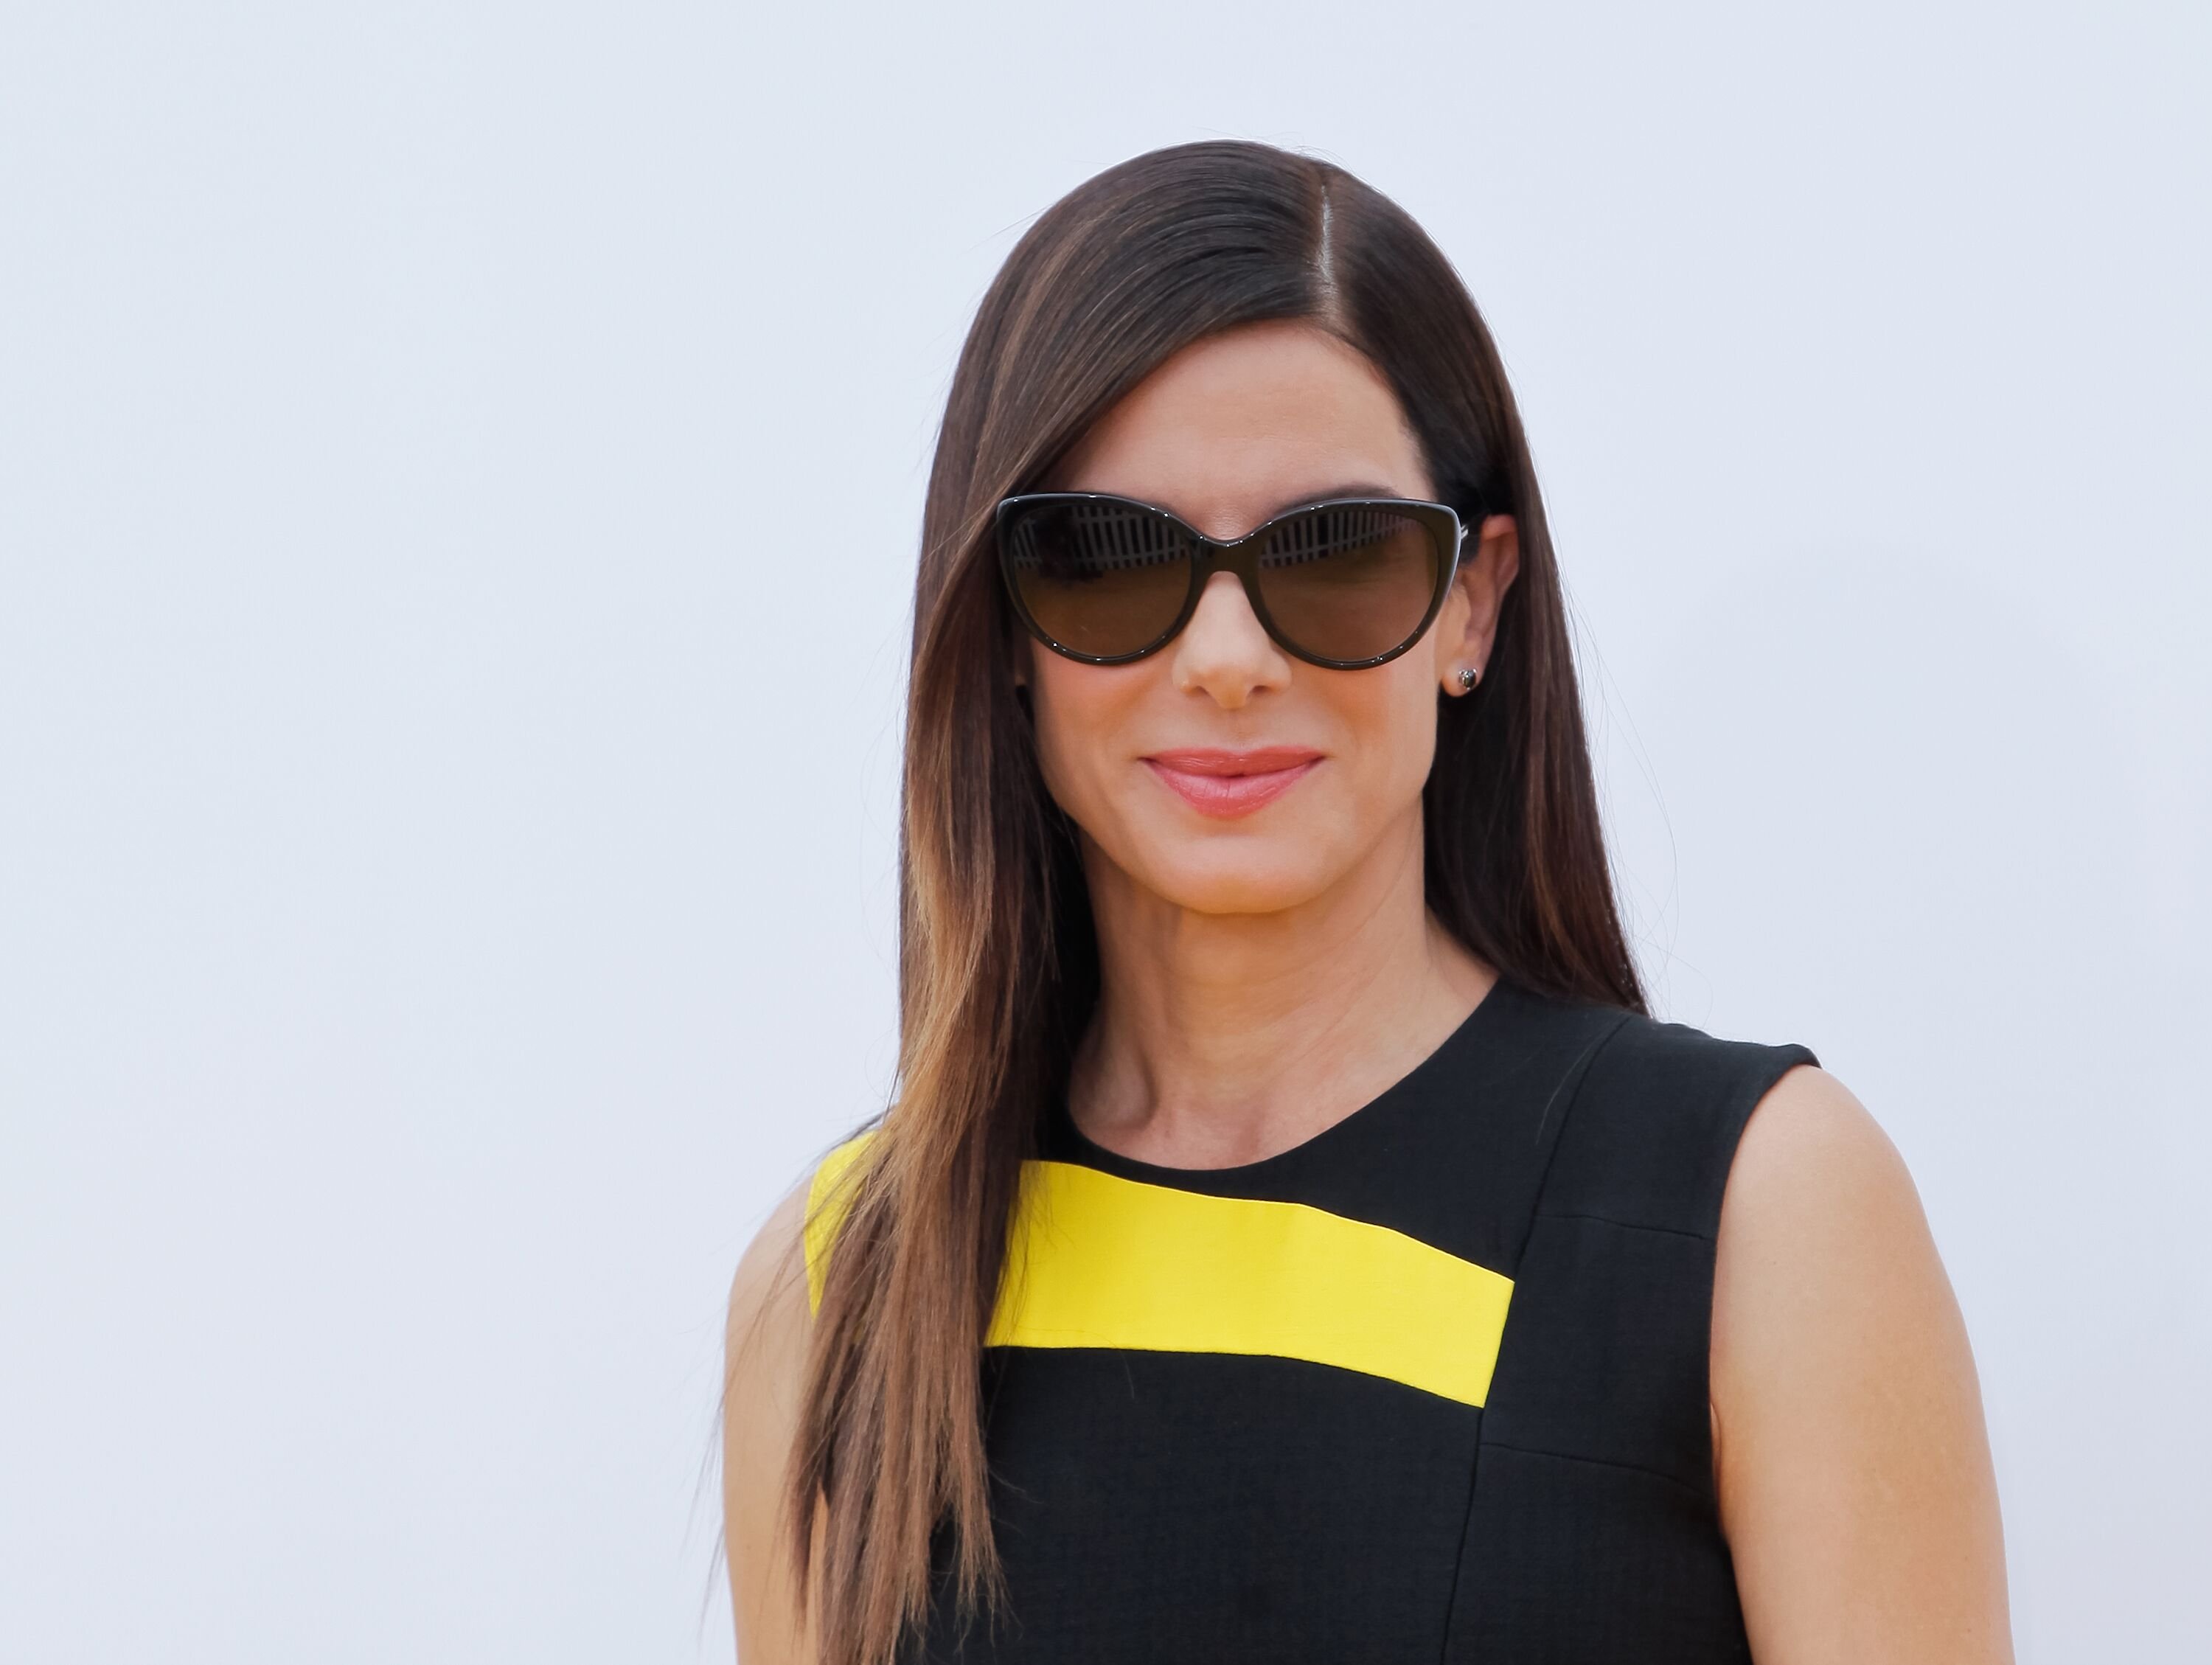  Sandra Bullock attends the Premiere of 'Minions' at The Shrine Auditorium | Photo: Getty Images